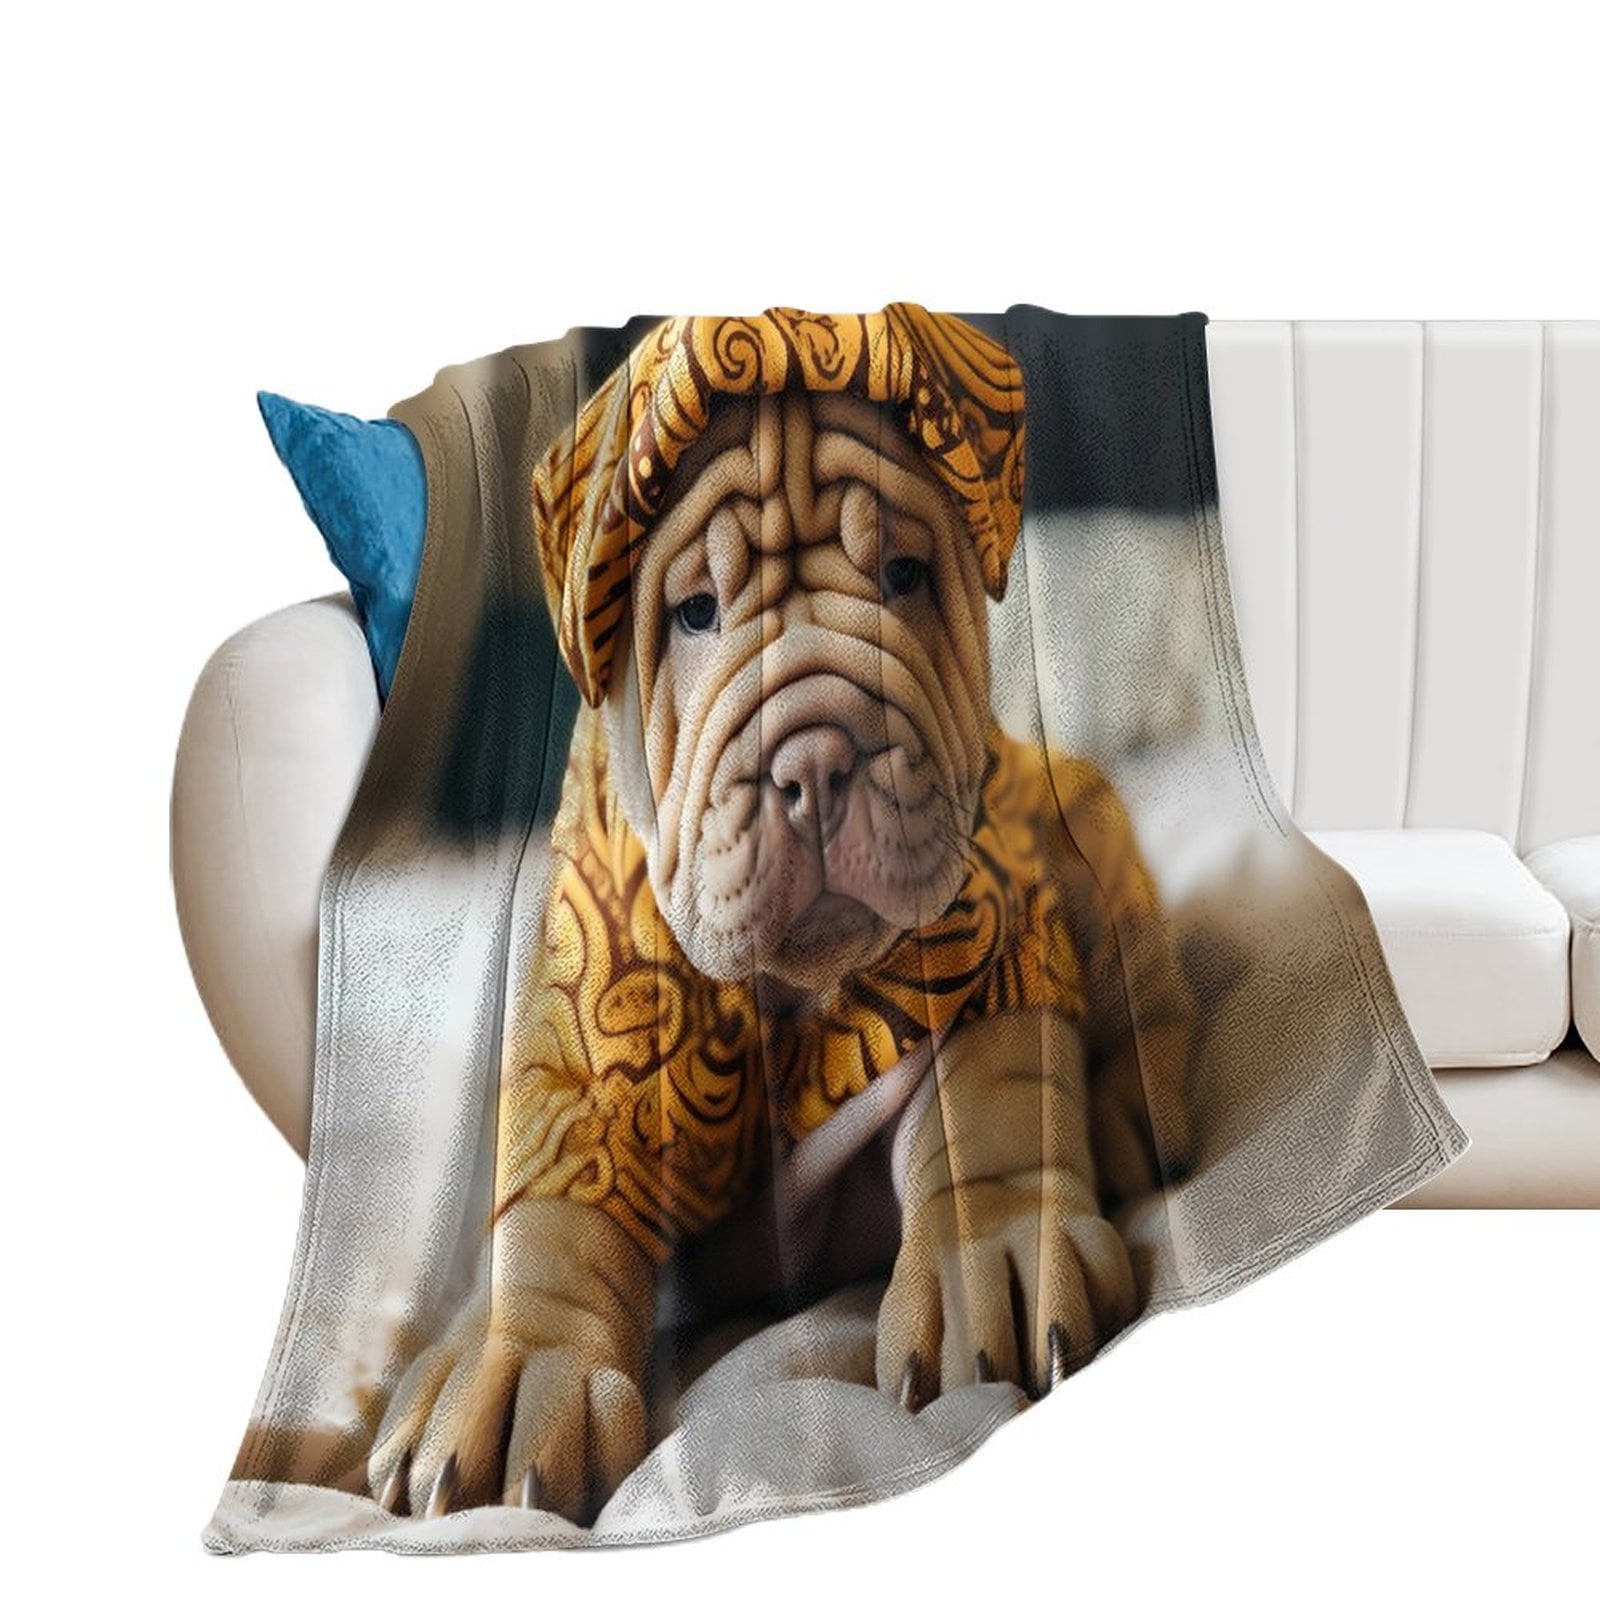 Chinese Shar Pei 3 Lightweight Bedding Fleece Throw Blanket for Couch ...